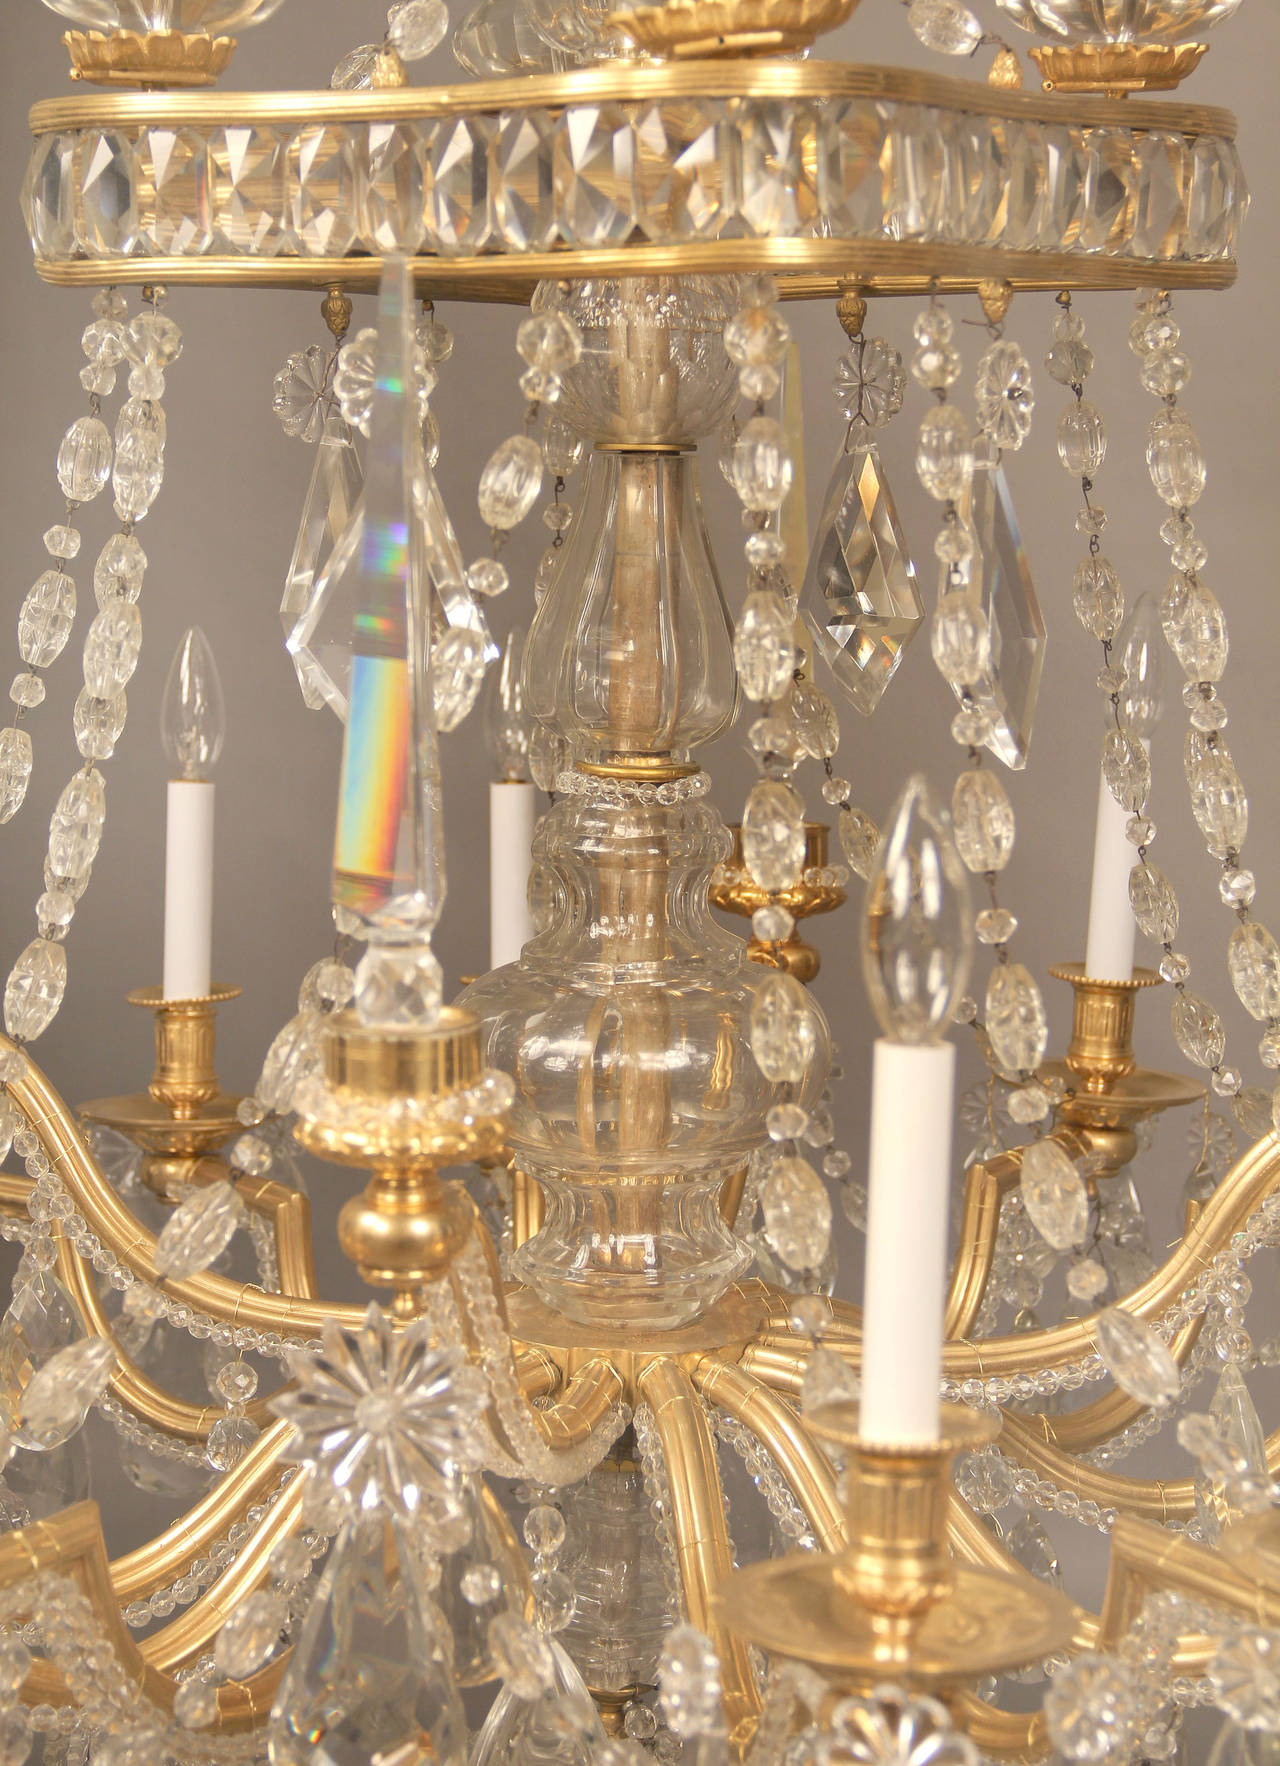 Gilt Very Fine and Special Mid-19th Century Baccarat Crystal Chandelier For Sale